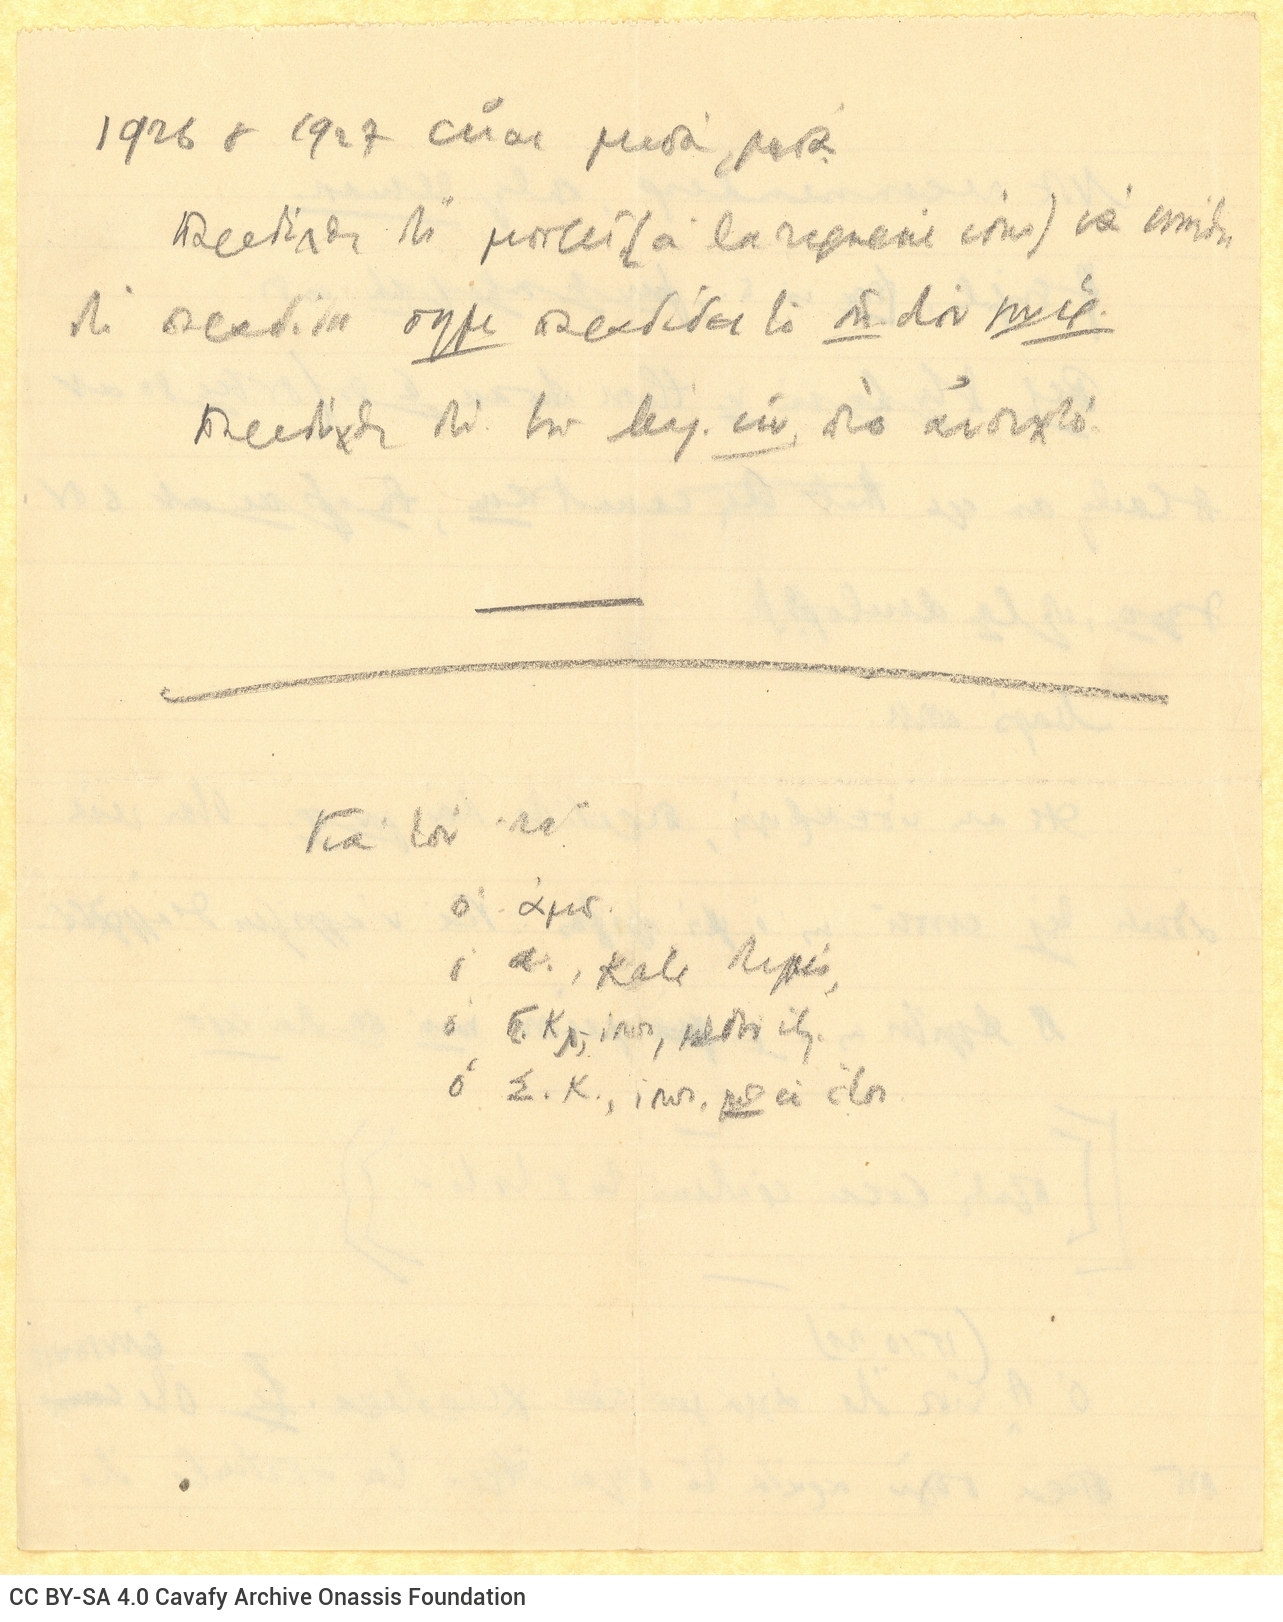 Handwritten notes on both sides of a ruled sheet and on one side of a second ruled sheet. On the first sheet, the date ind